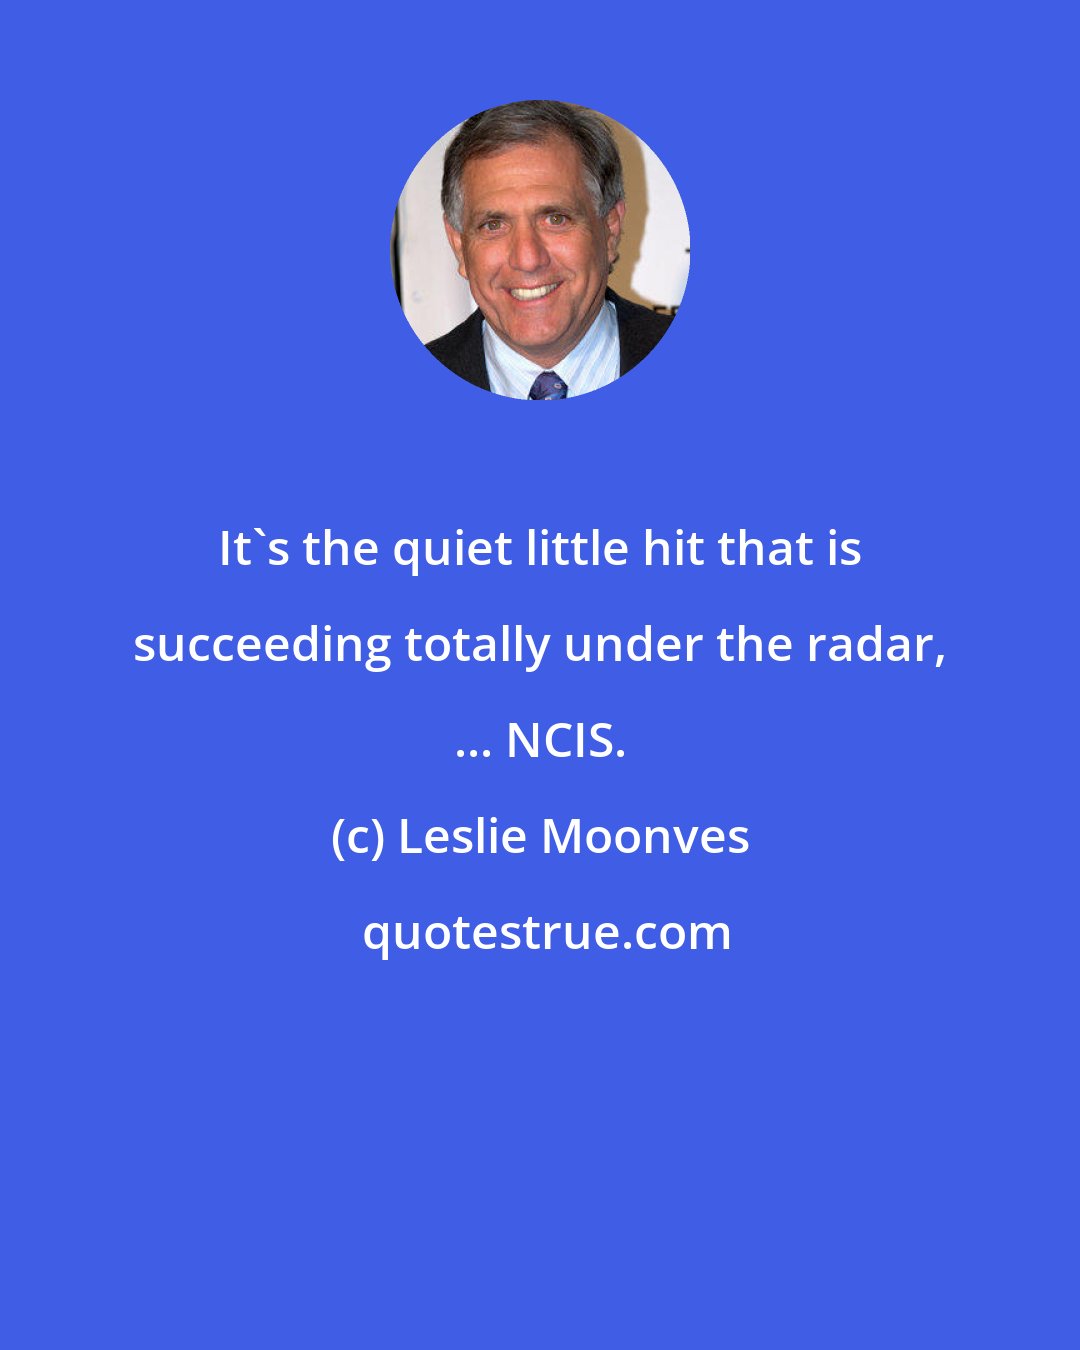 Leslie Moonves: It's the quiet little hit that is succeeding totally under the radar, ... NCIS.